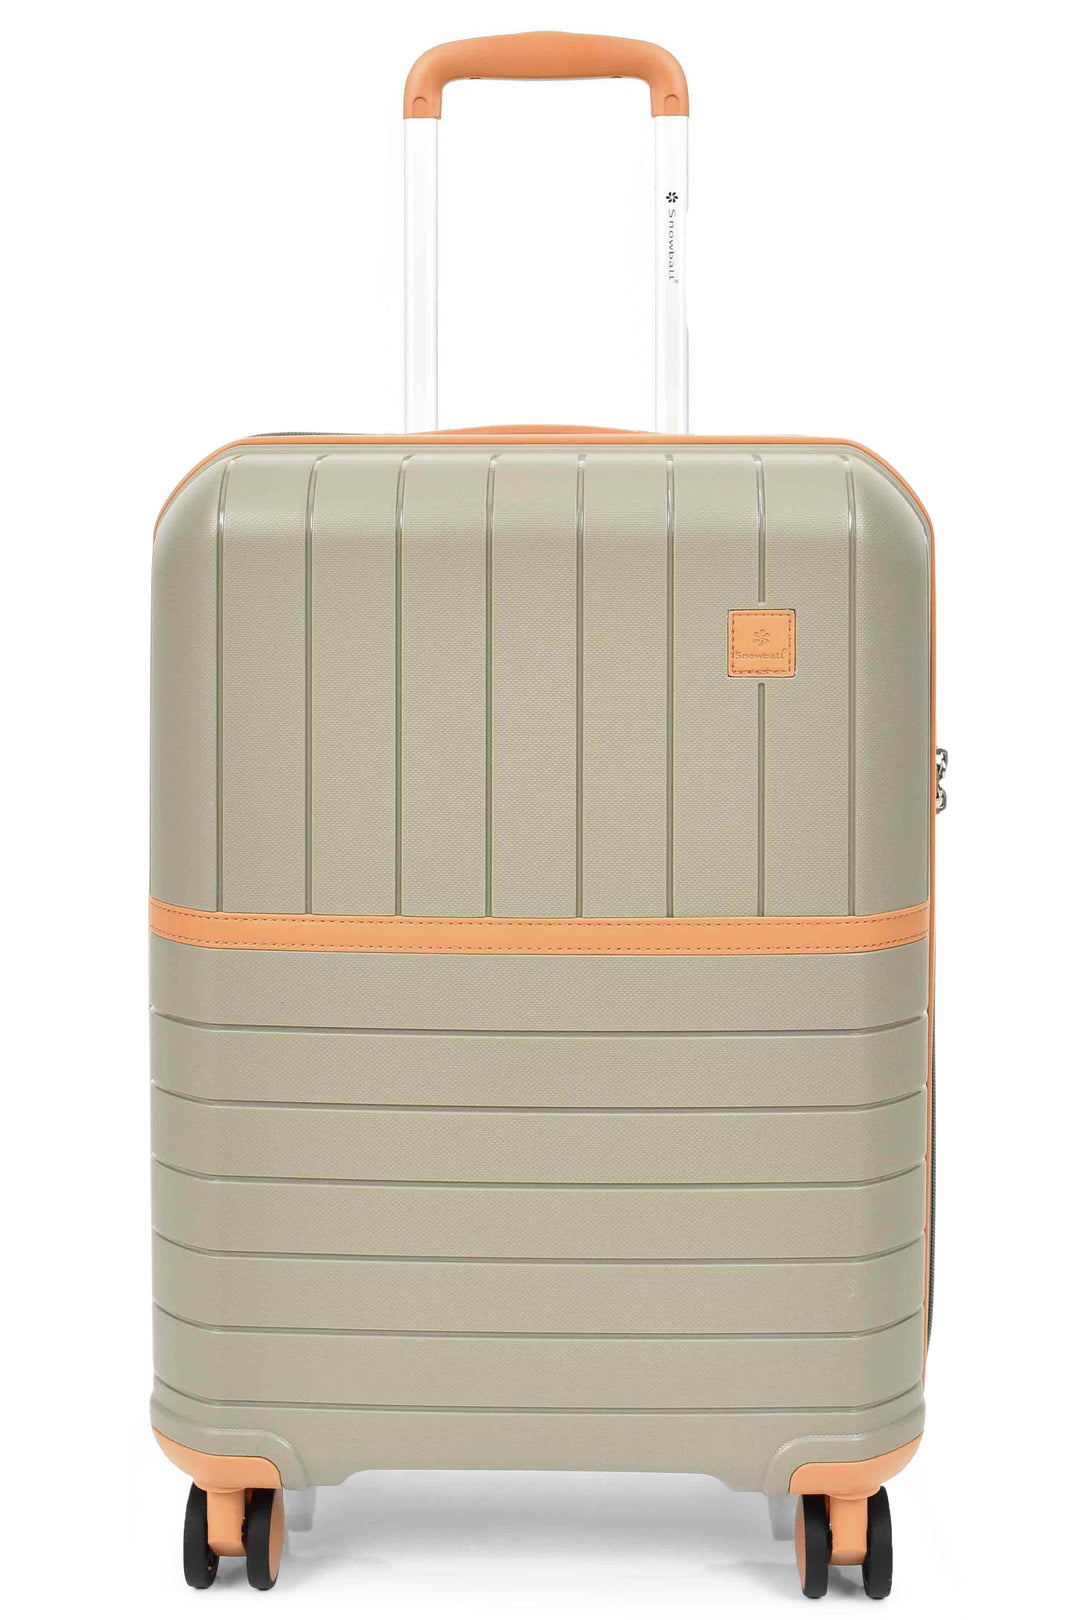 Excursion Hard Shell Suitcase 12